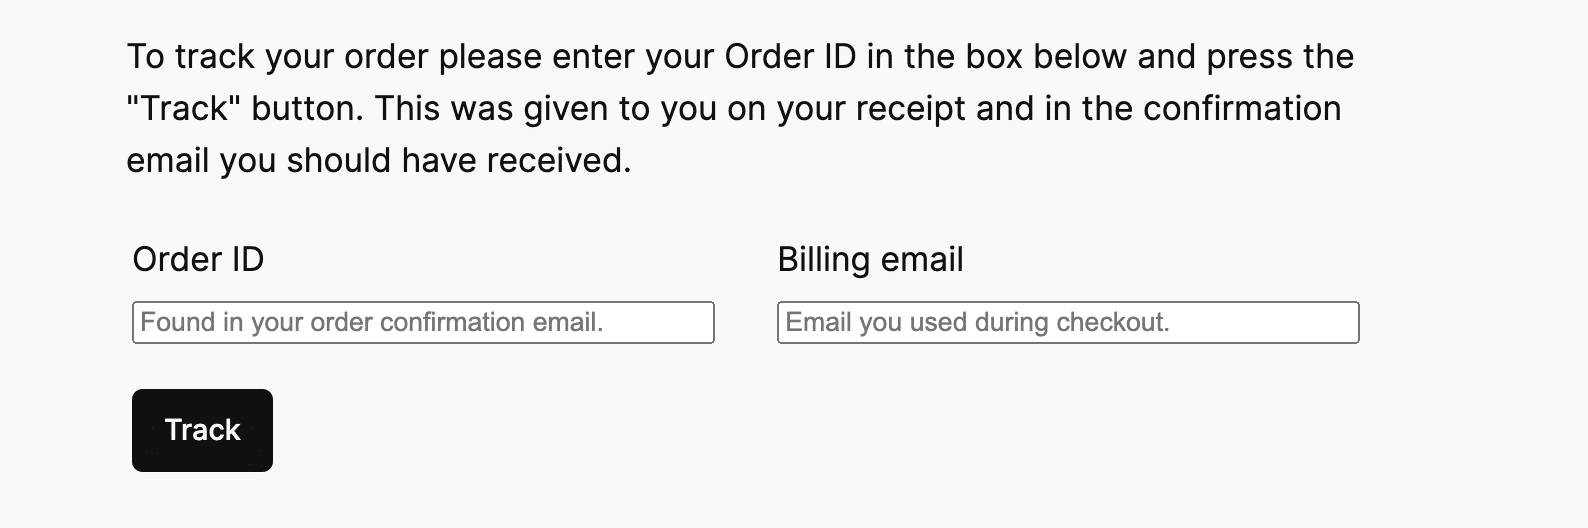 Shortcode to display a form where customers can track their orders.